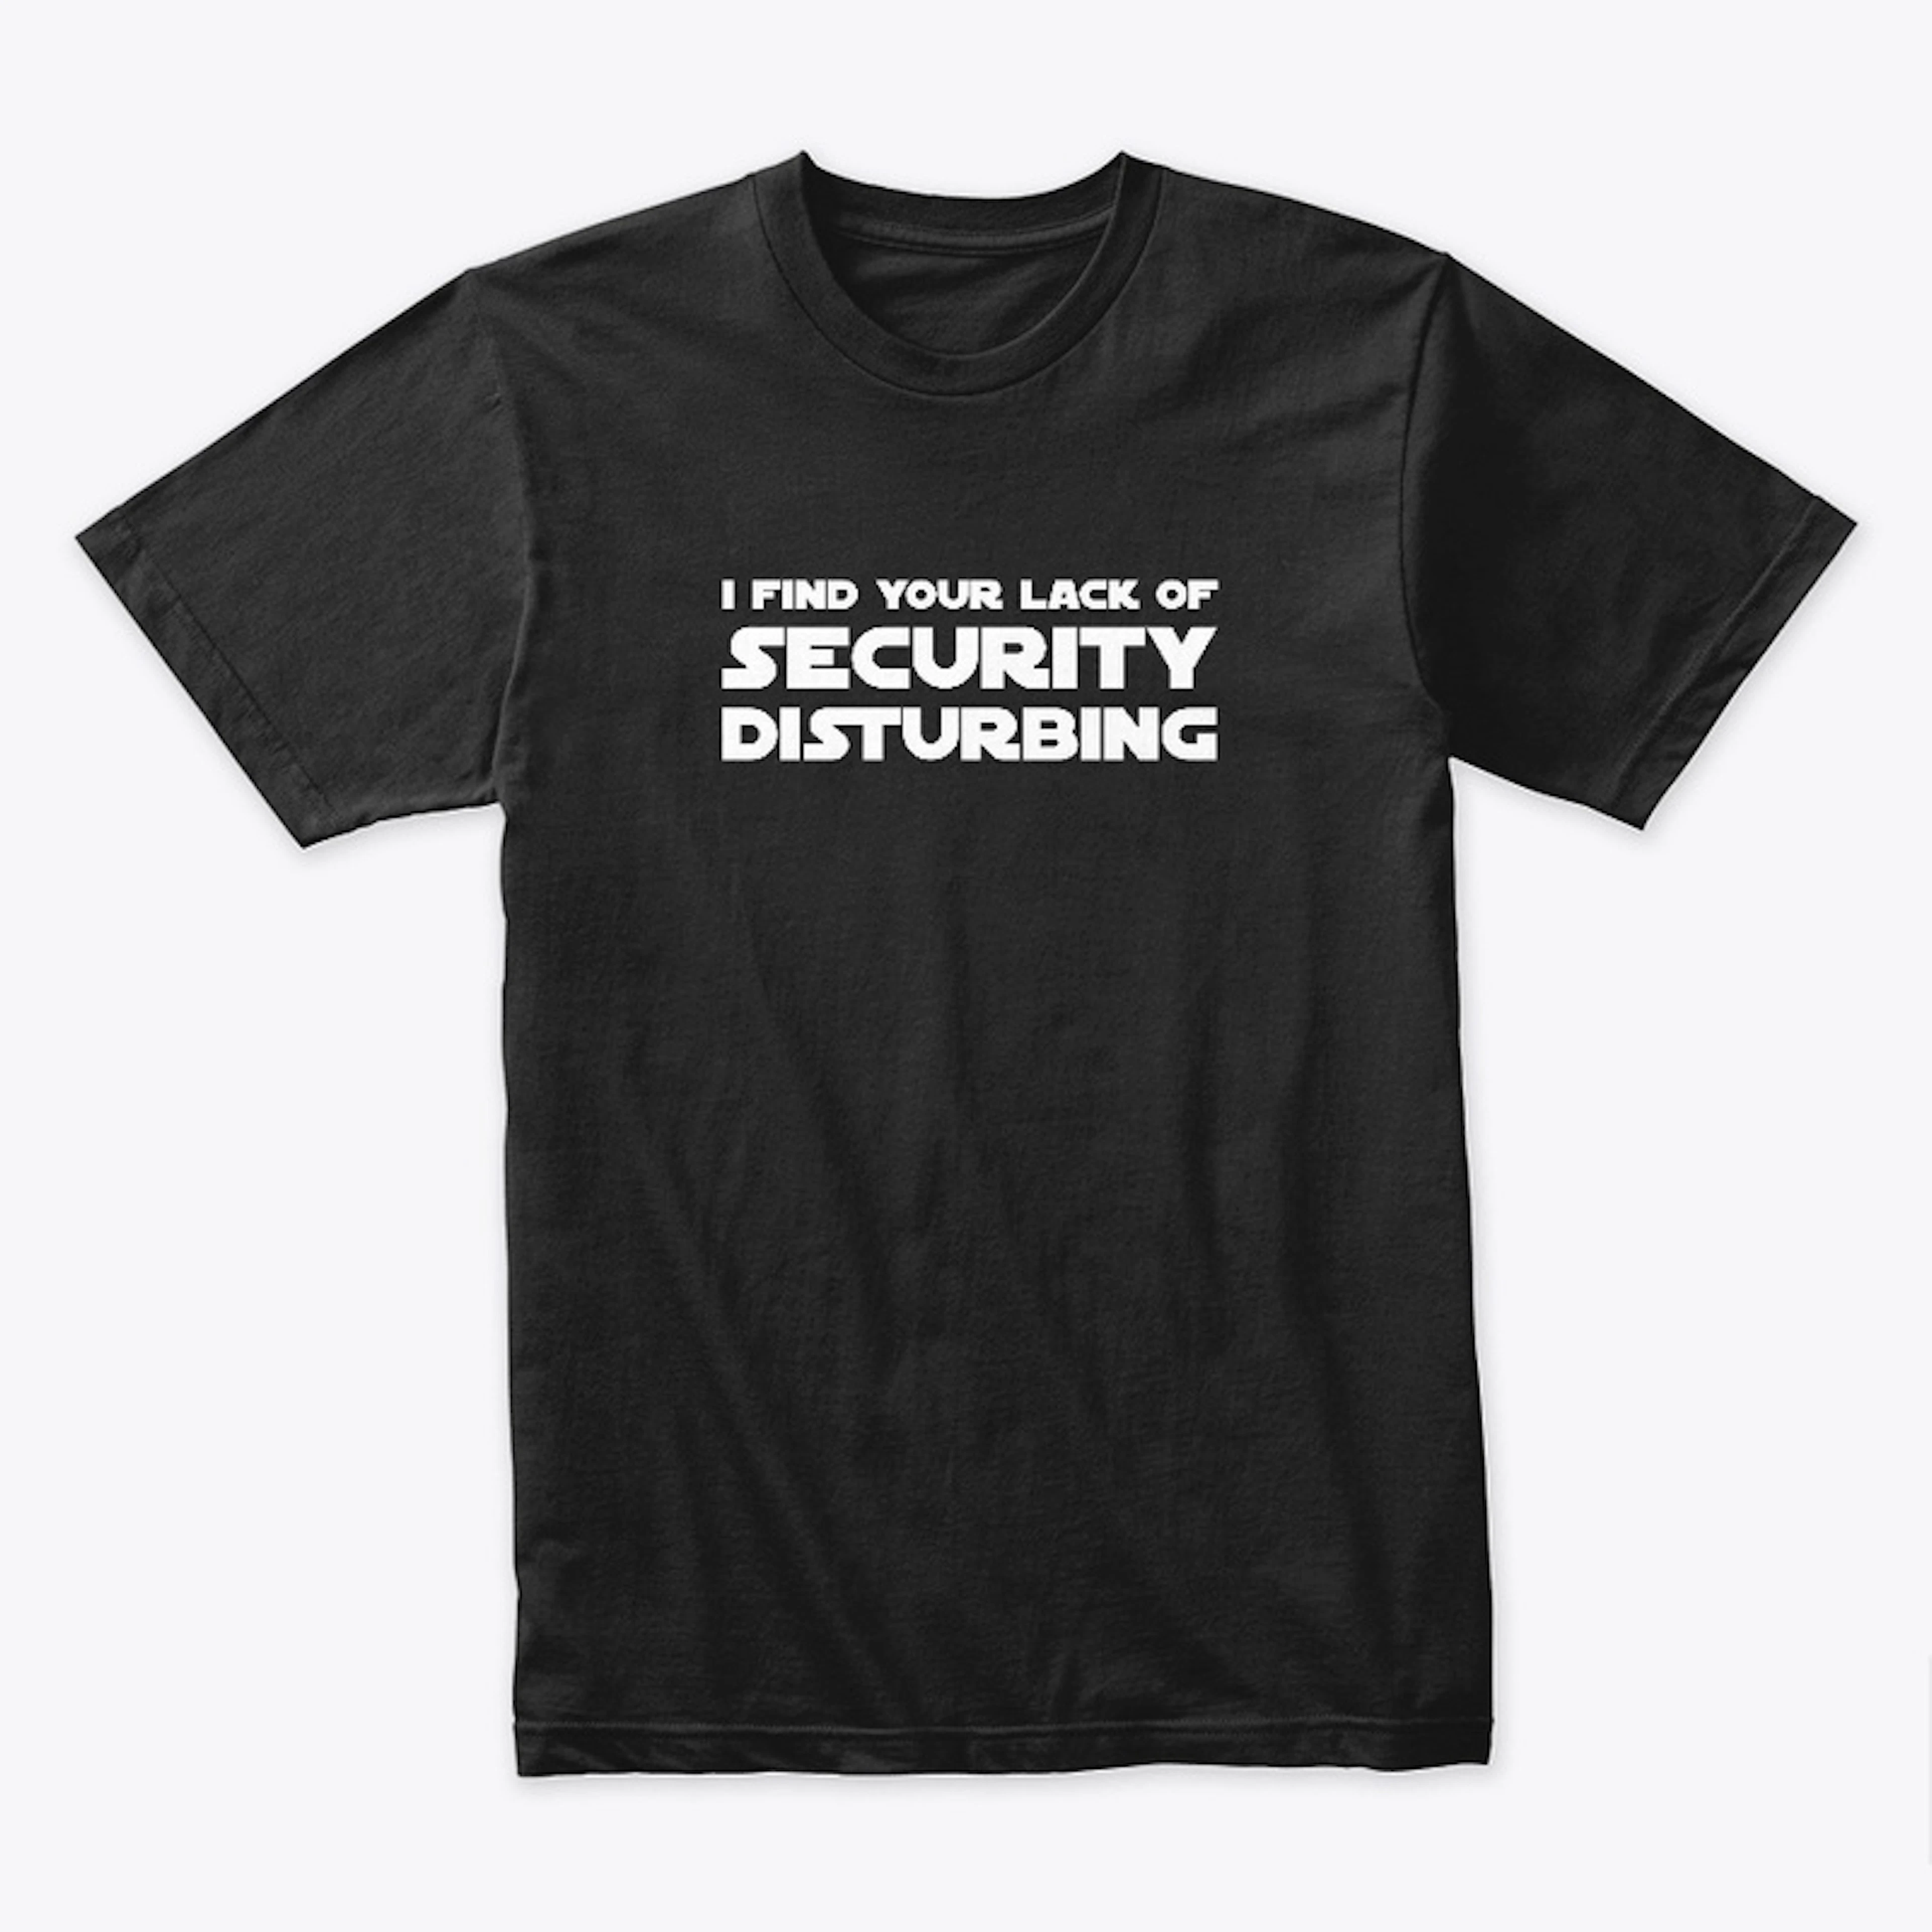 I Find Your Lack of Security Disturbing